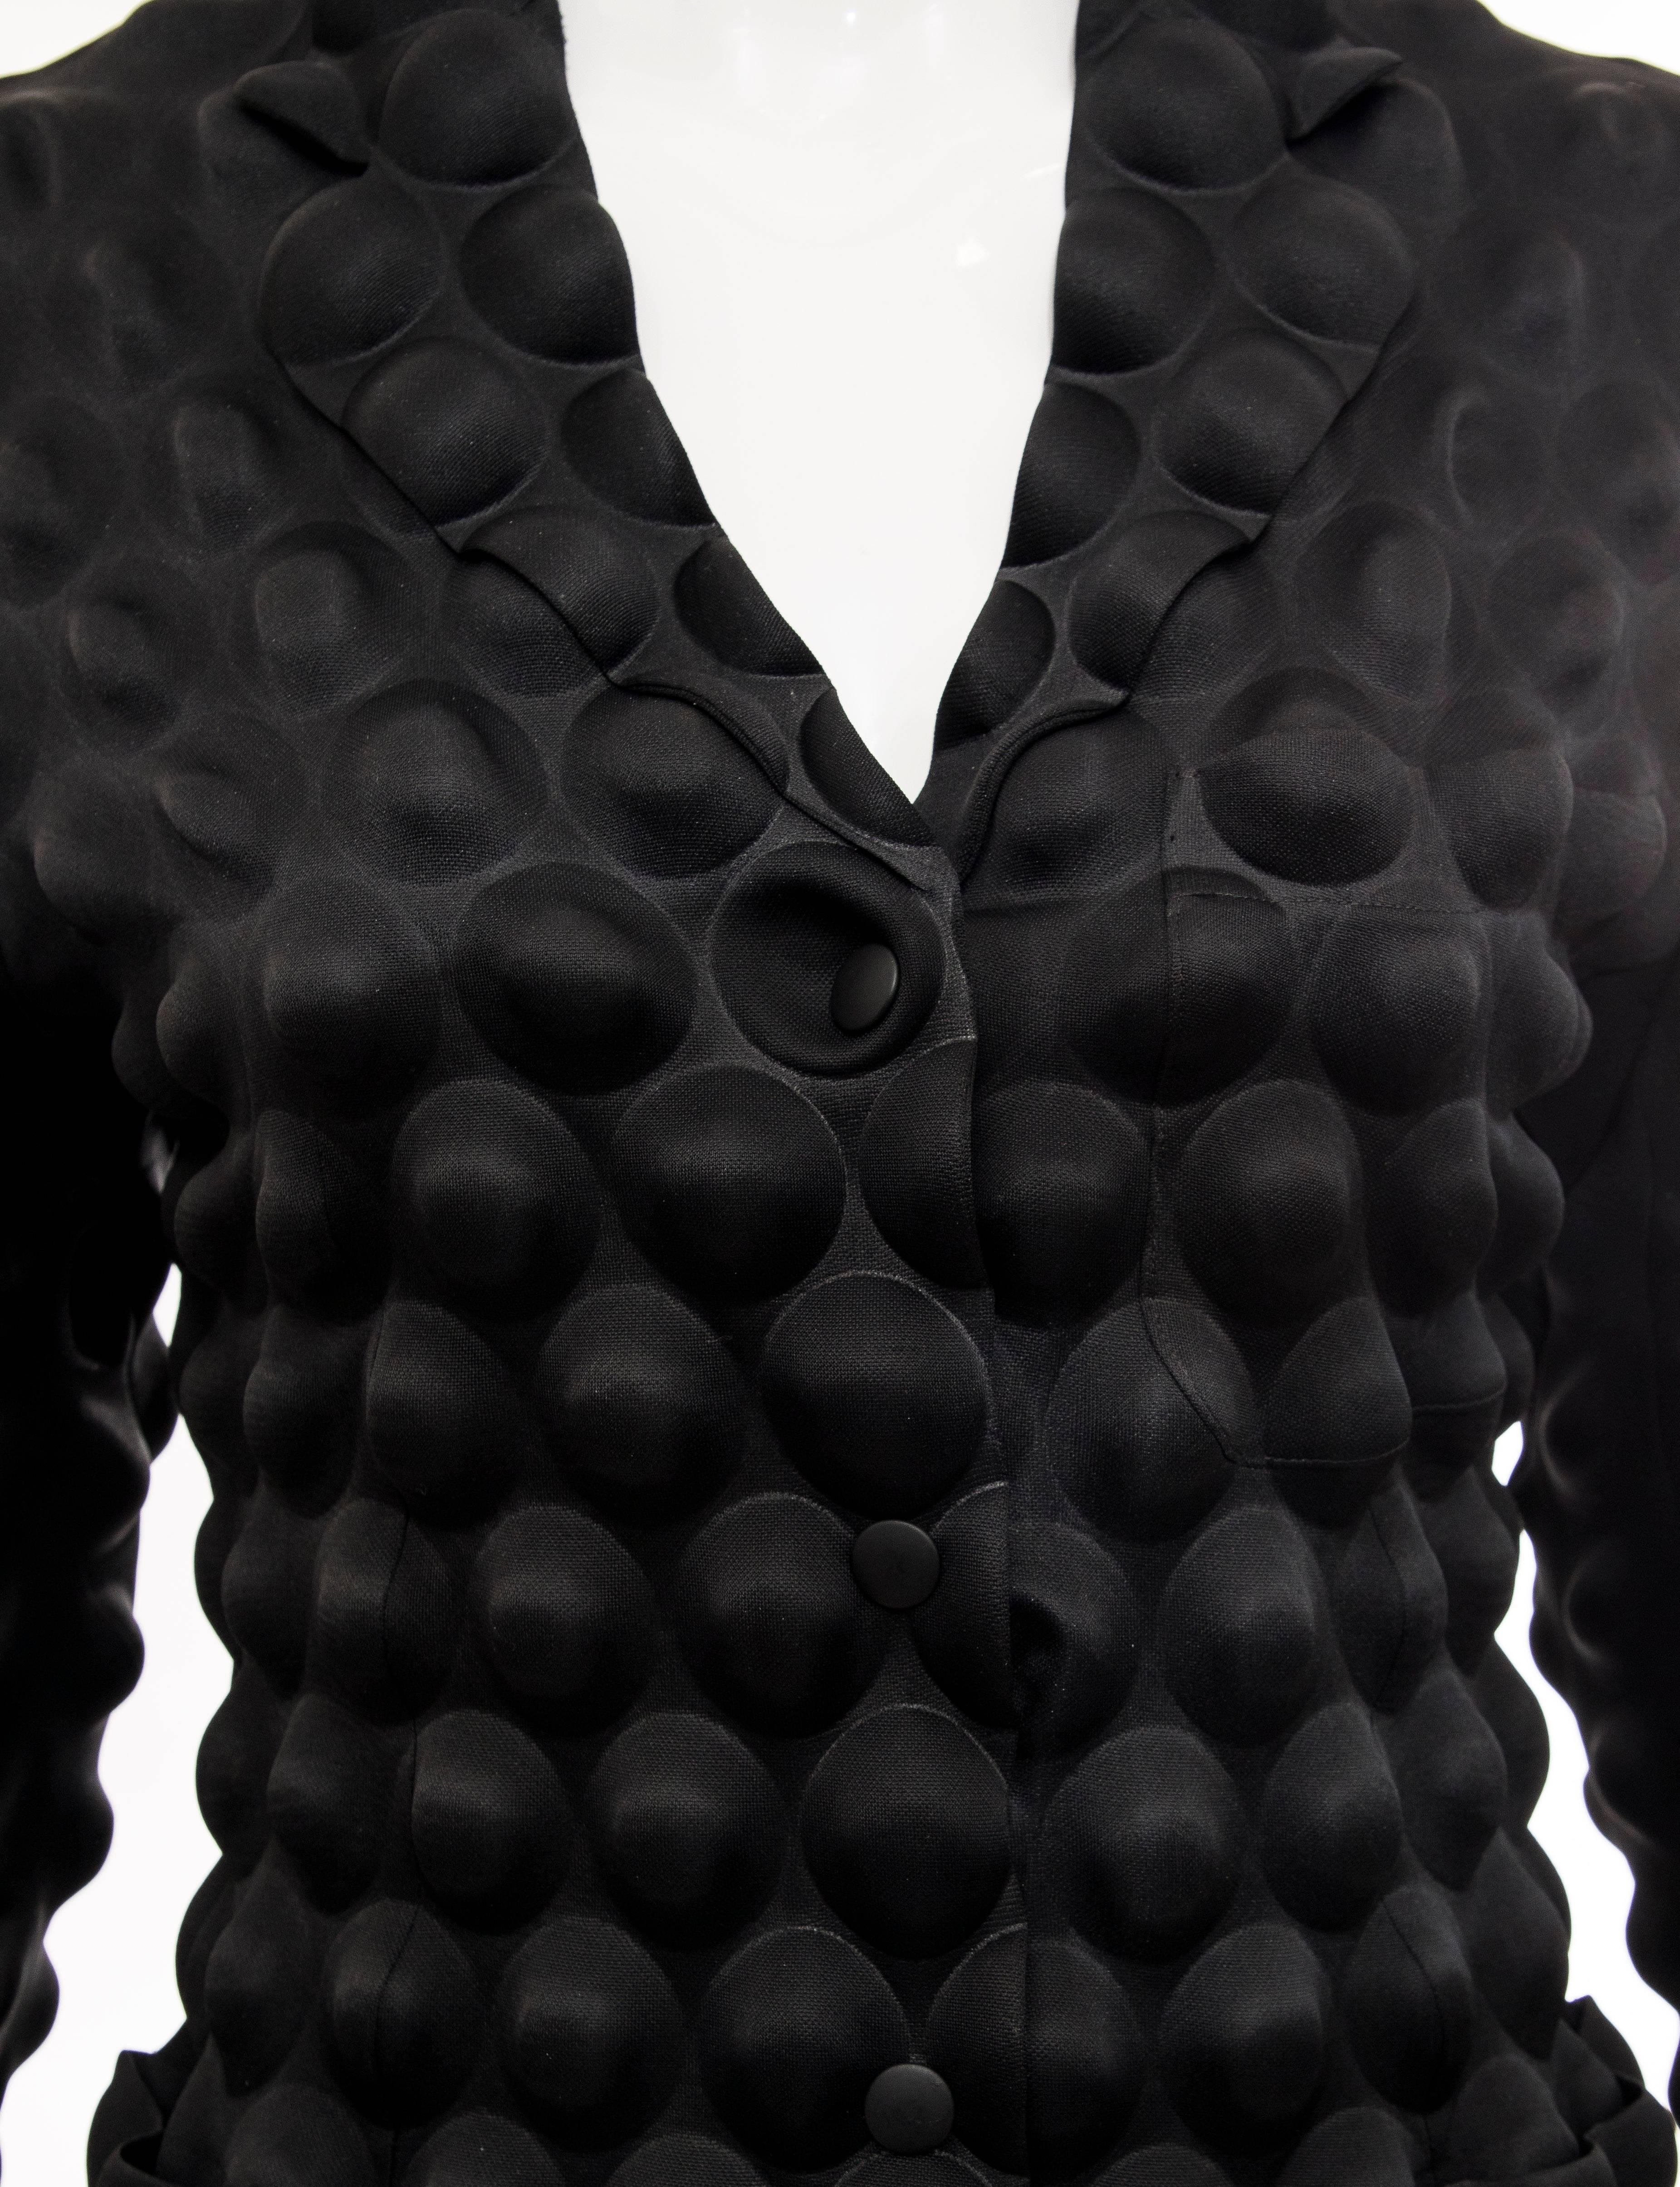 Issey Miyake Black Egg Carton Snap Front Blazer, Fall 2000 In Excellent Condition For Sale In Cincinnati, OH